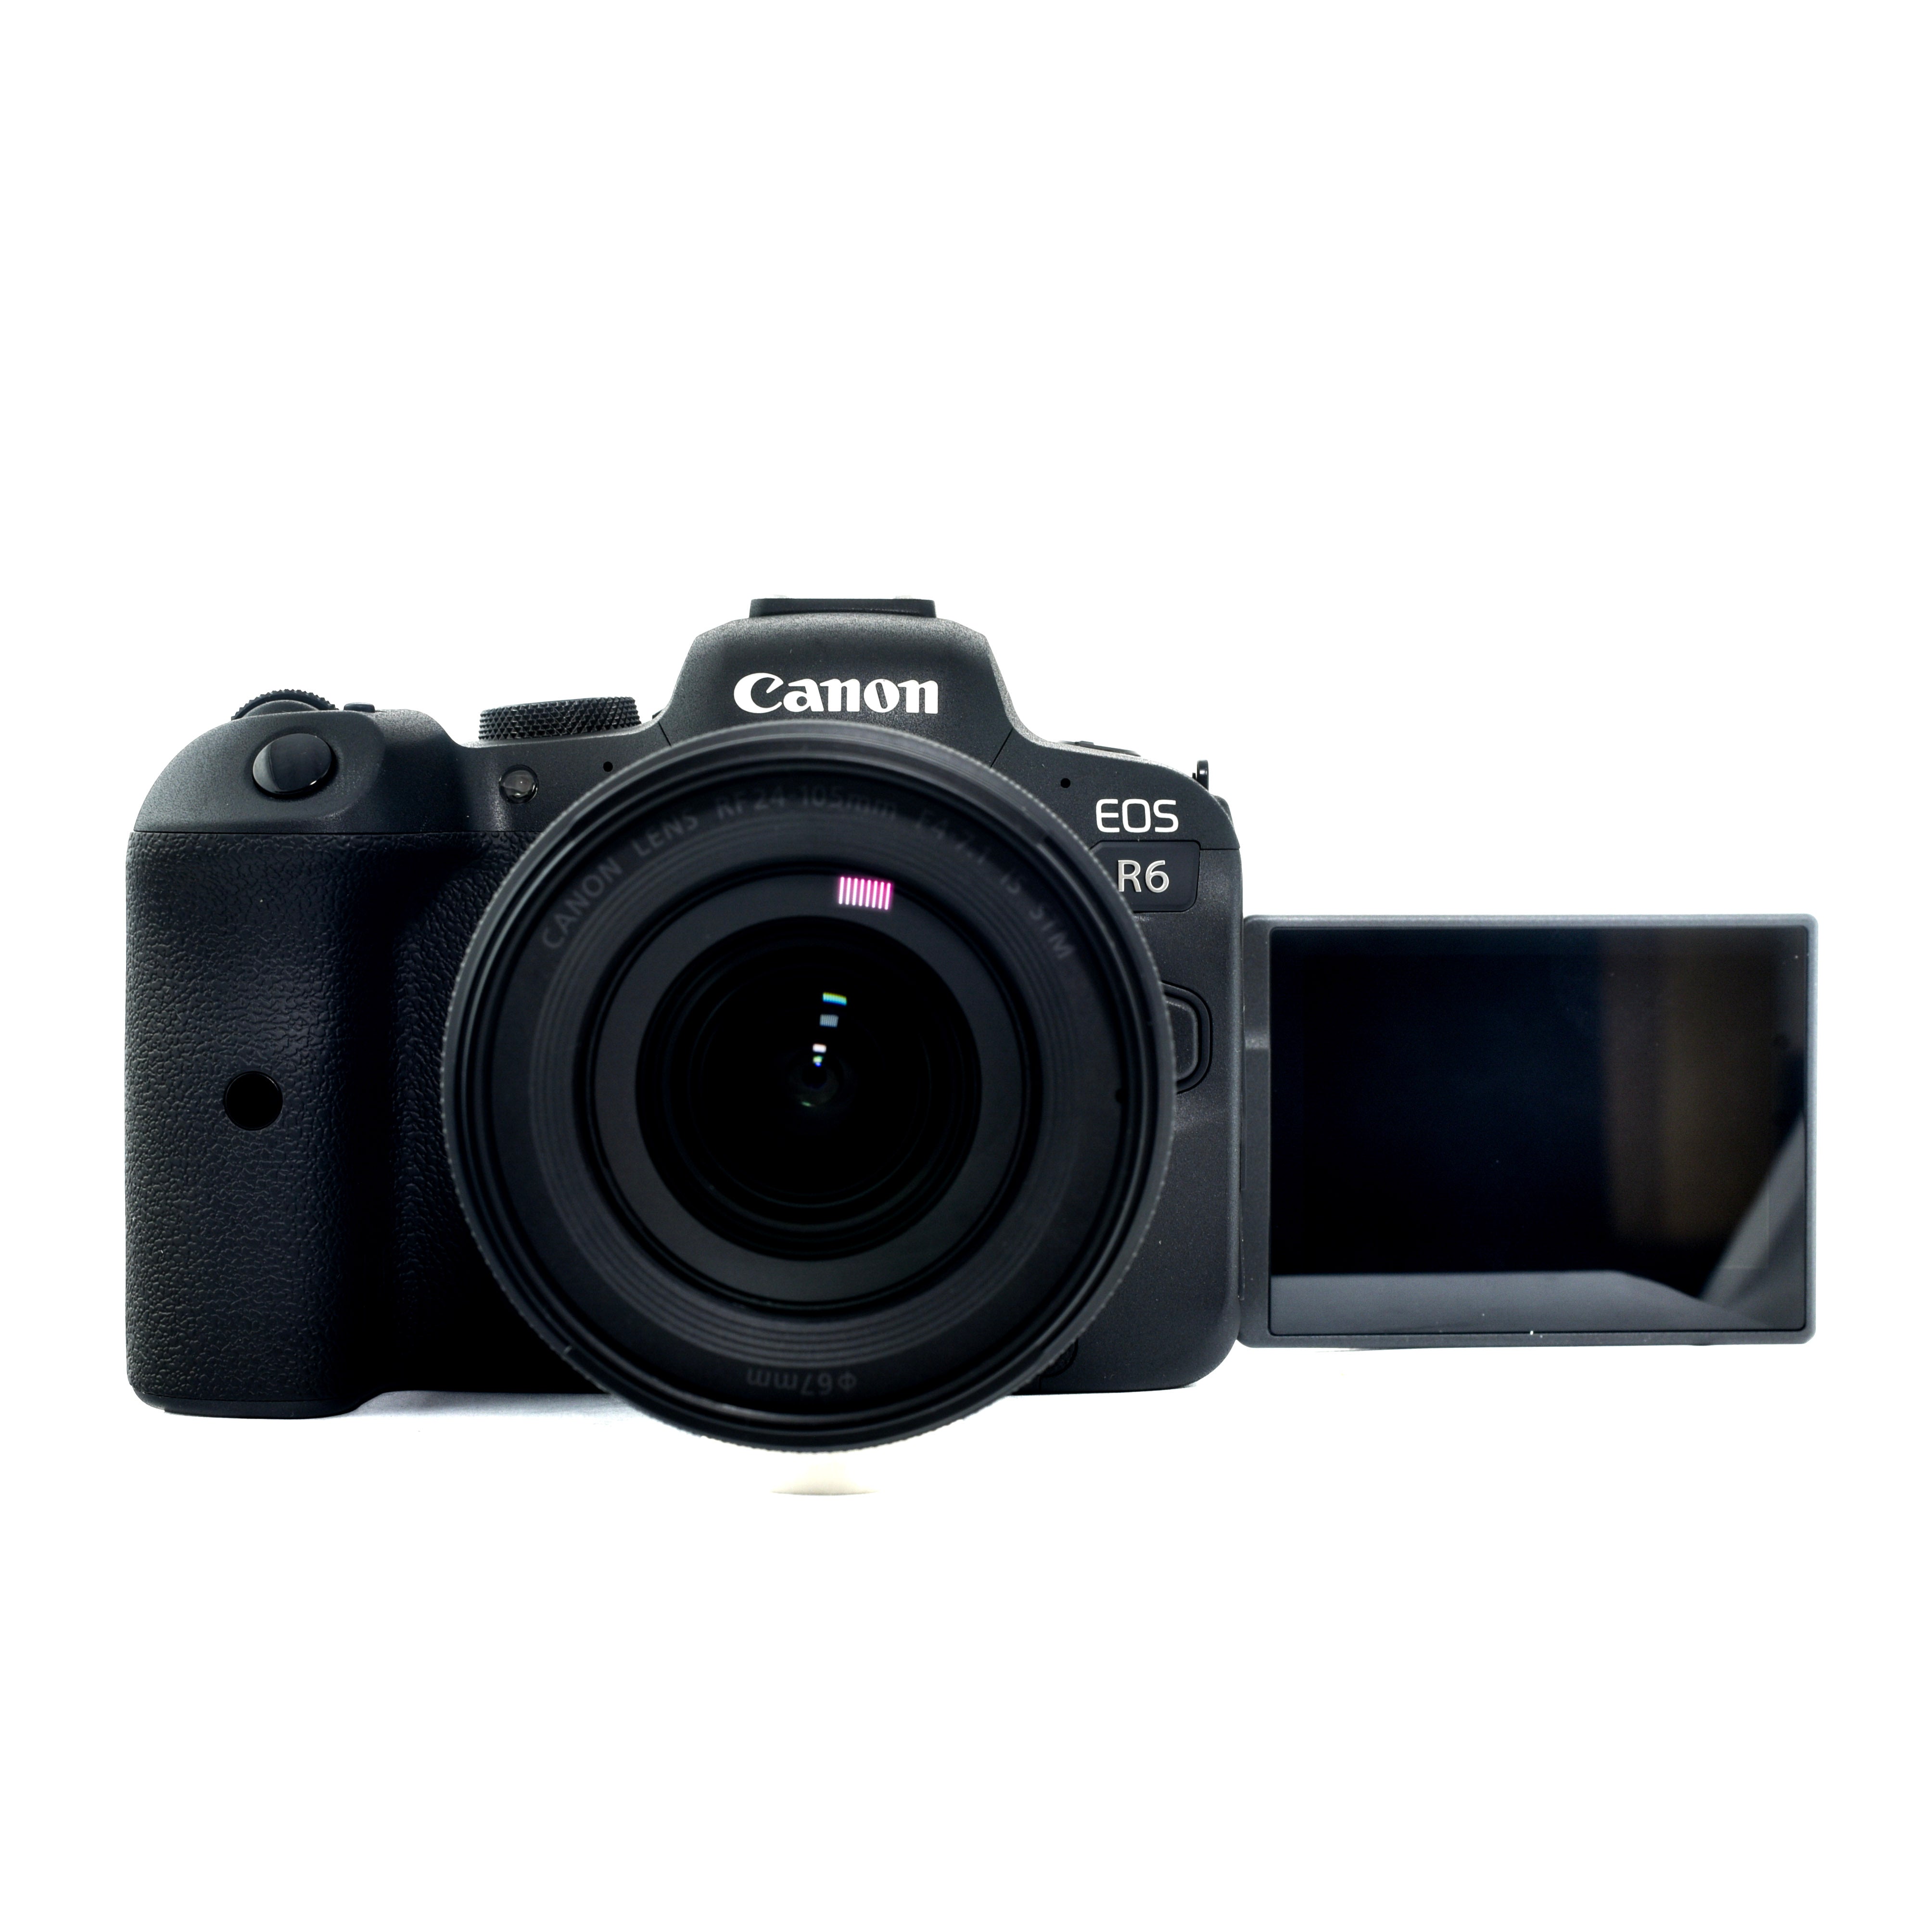 Canon Eos R6  Mirrorless Dslr Camera & 24-105mm IS STM lens